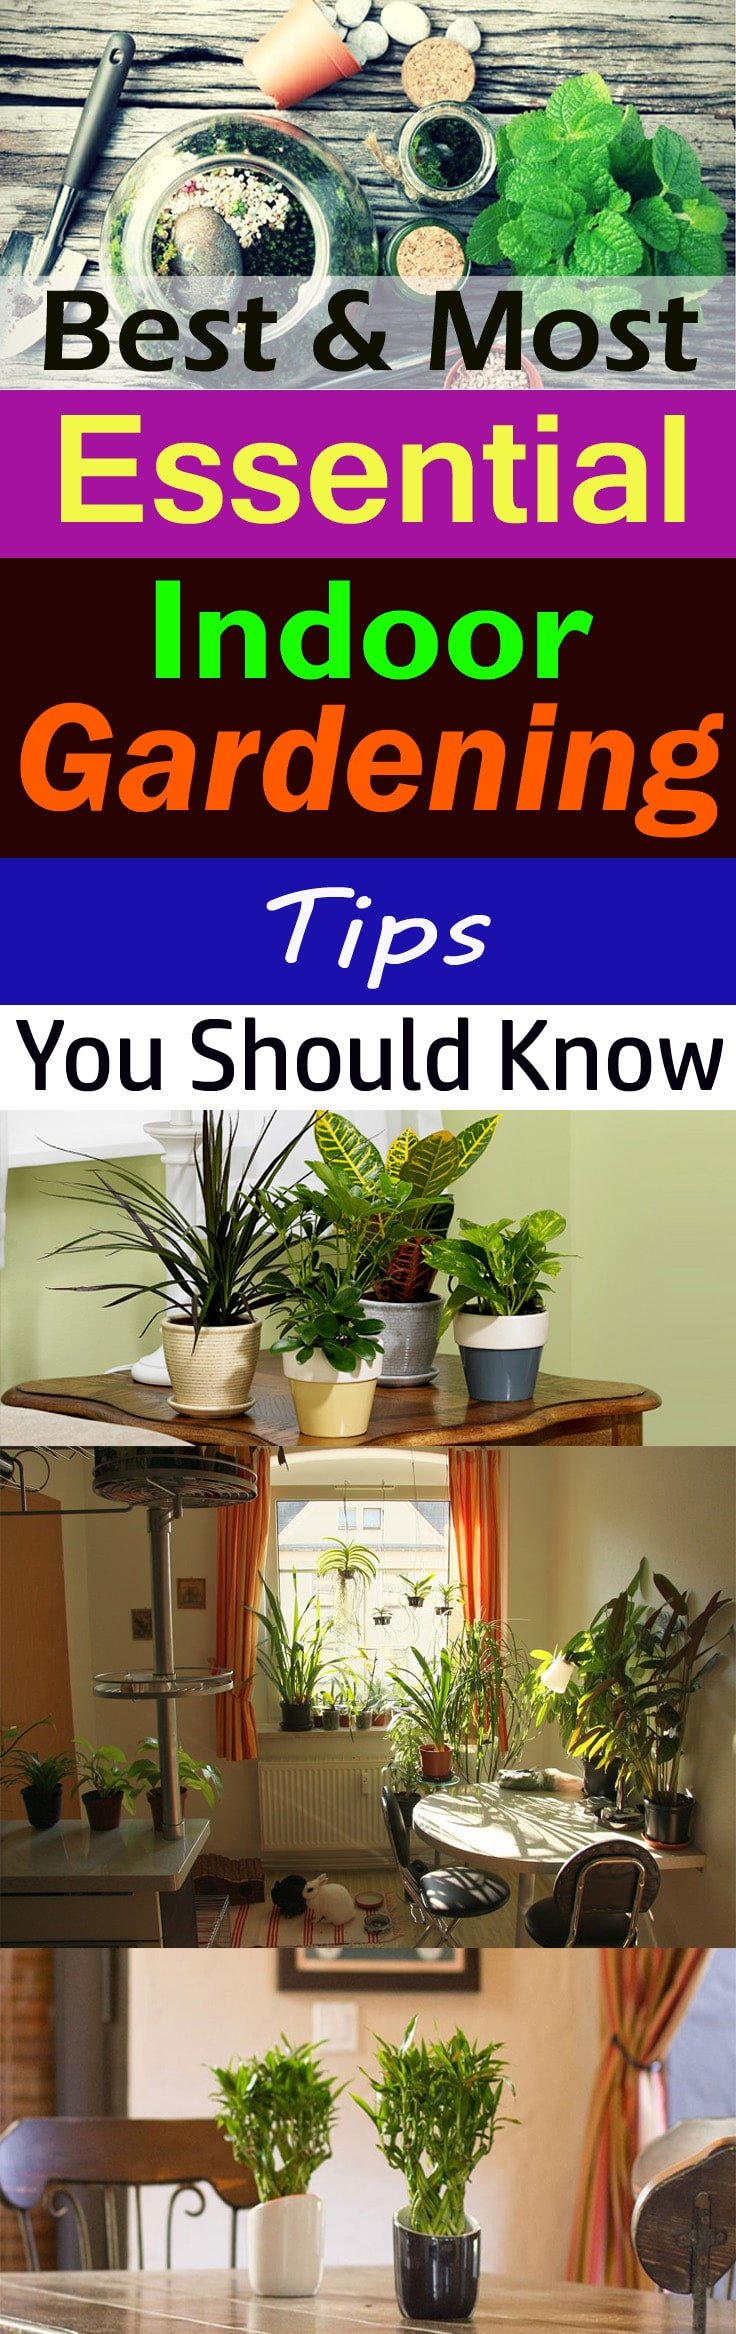 Whether you want to make an indoor garden or you already have one-- Check out some of the best & most essential indoor gardening tips for help!